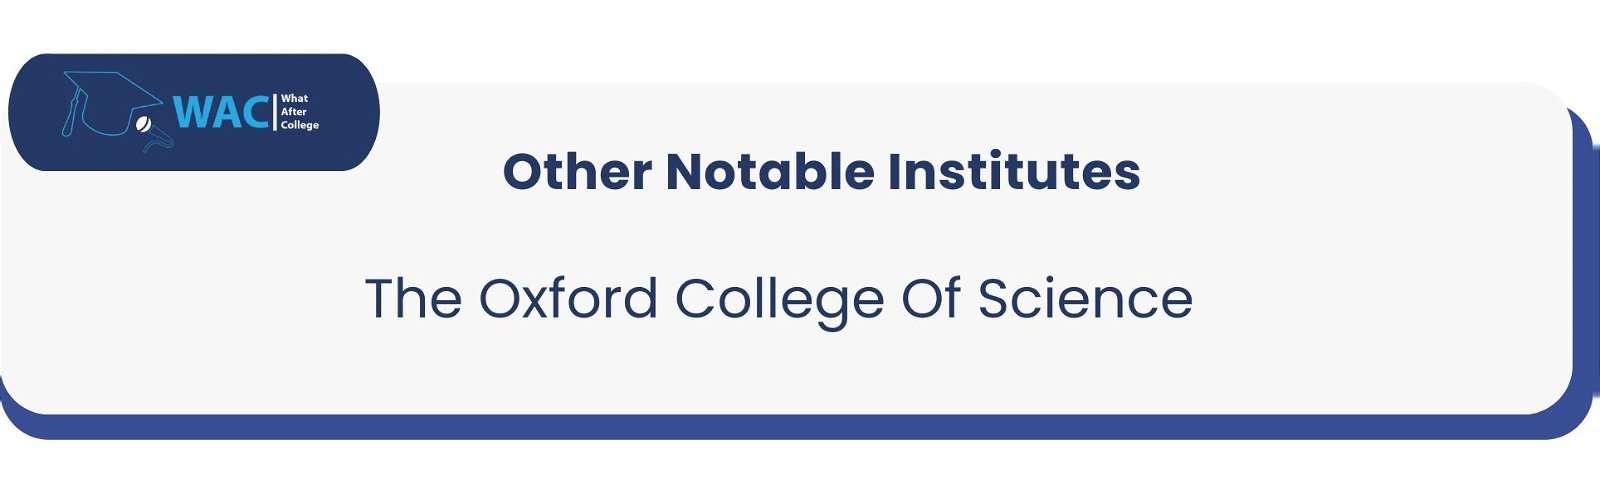 The Oxford College Of Science